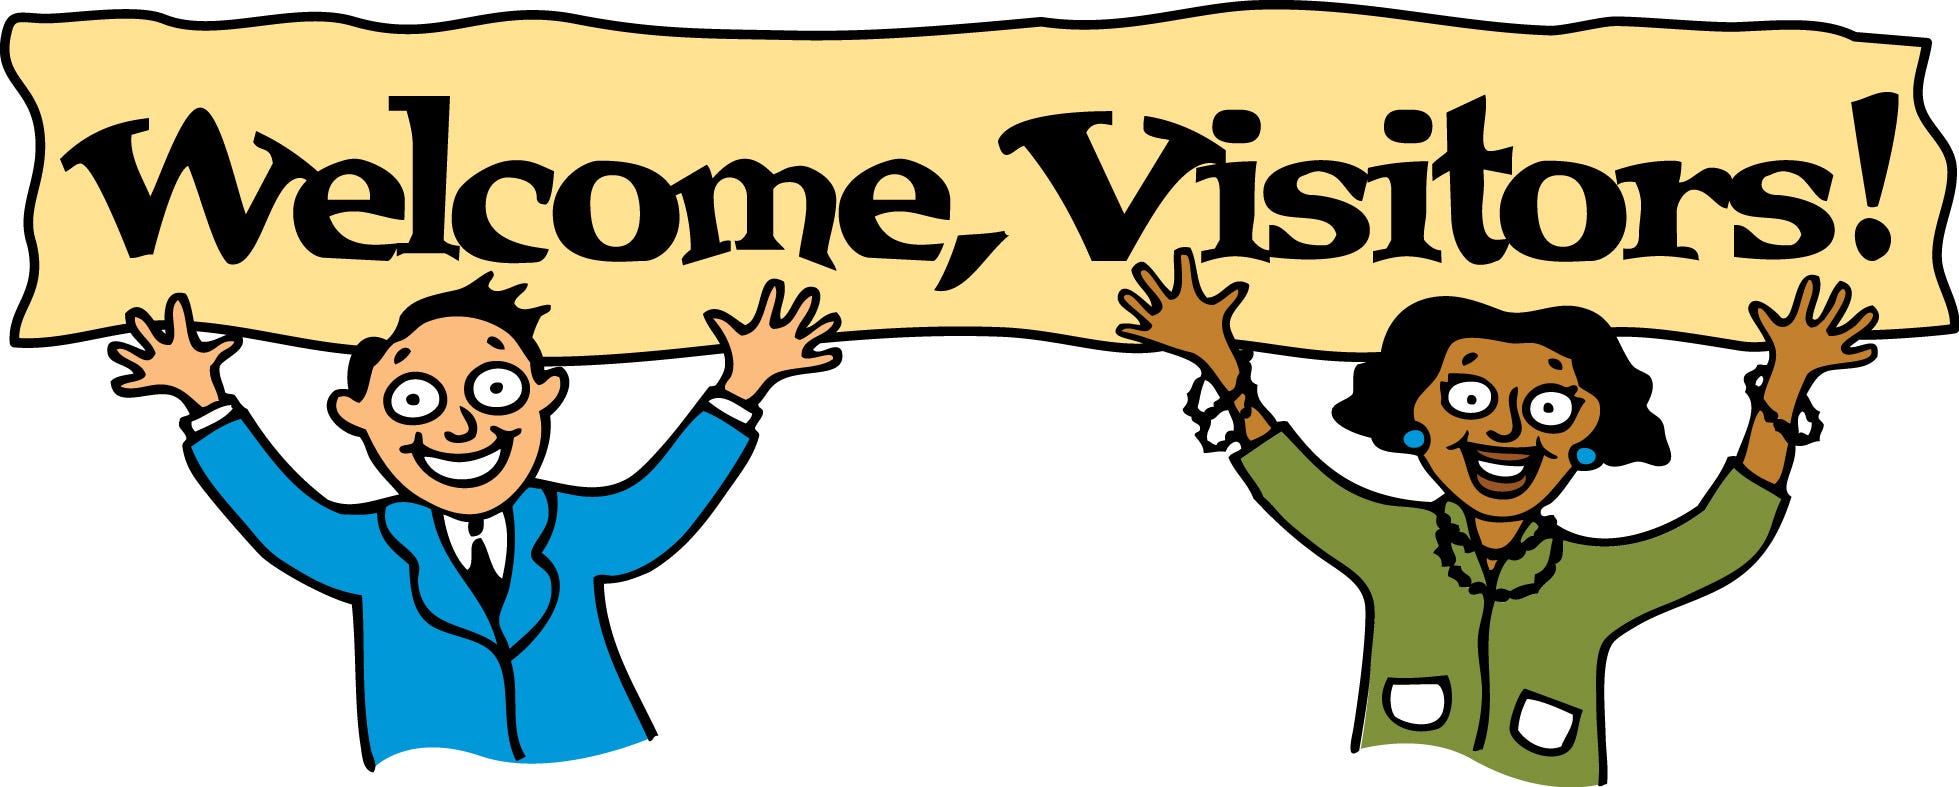 visitor definition in tourism